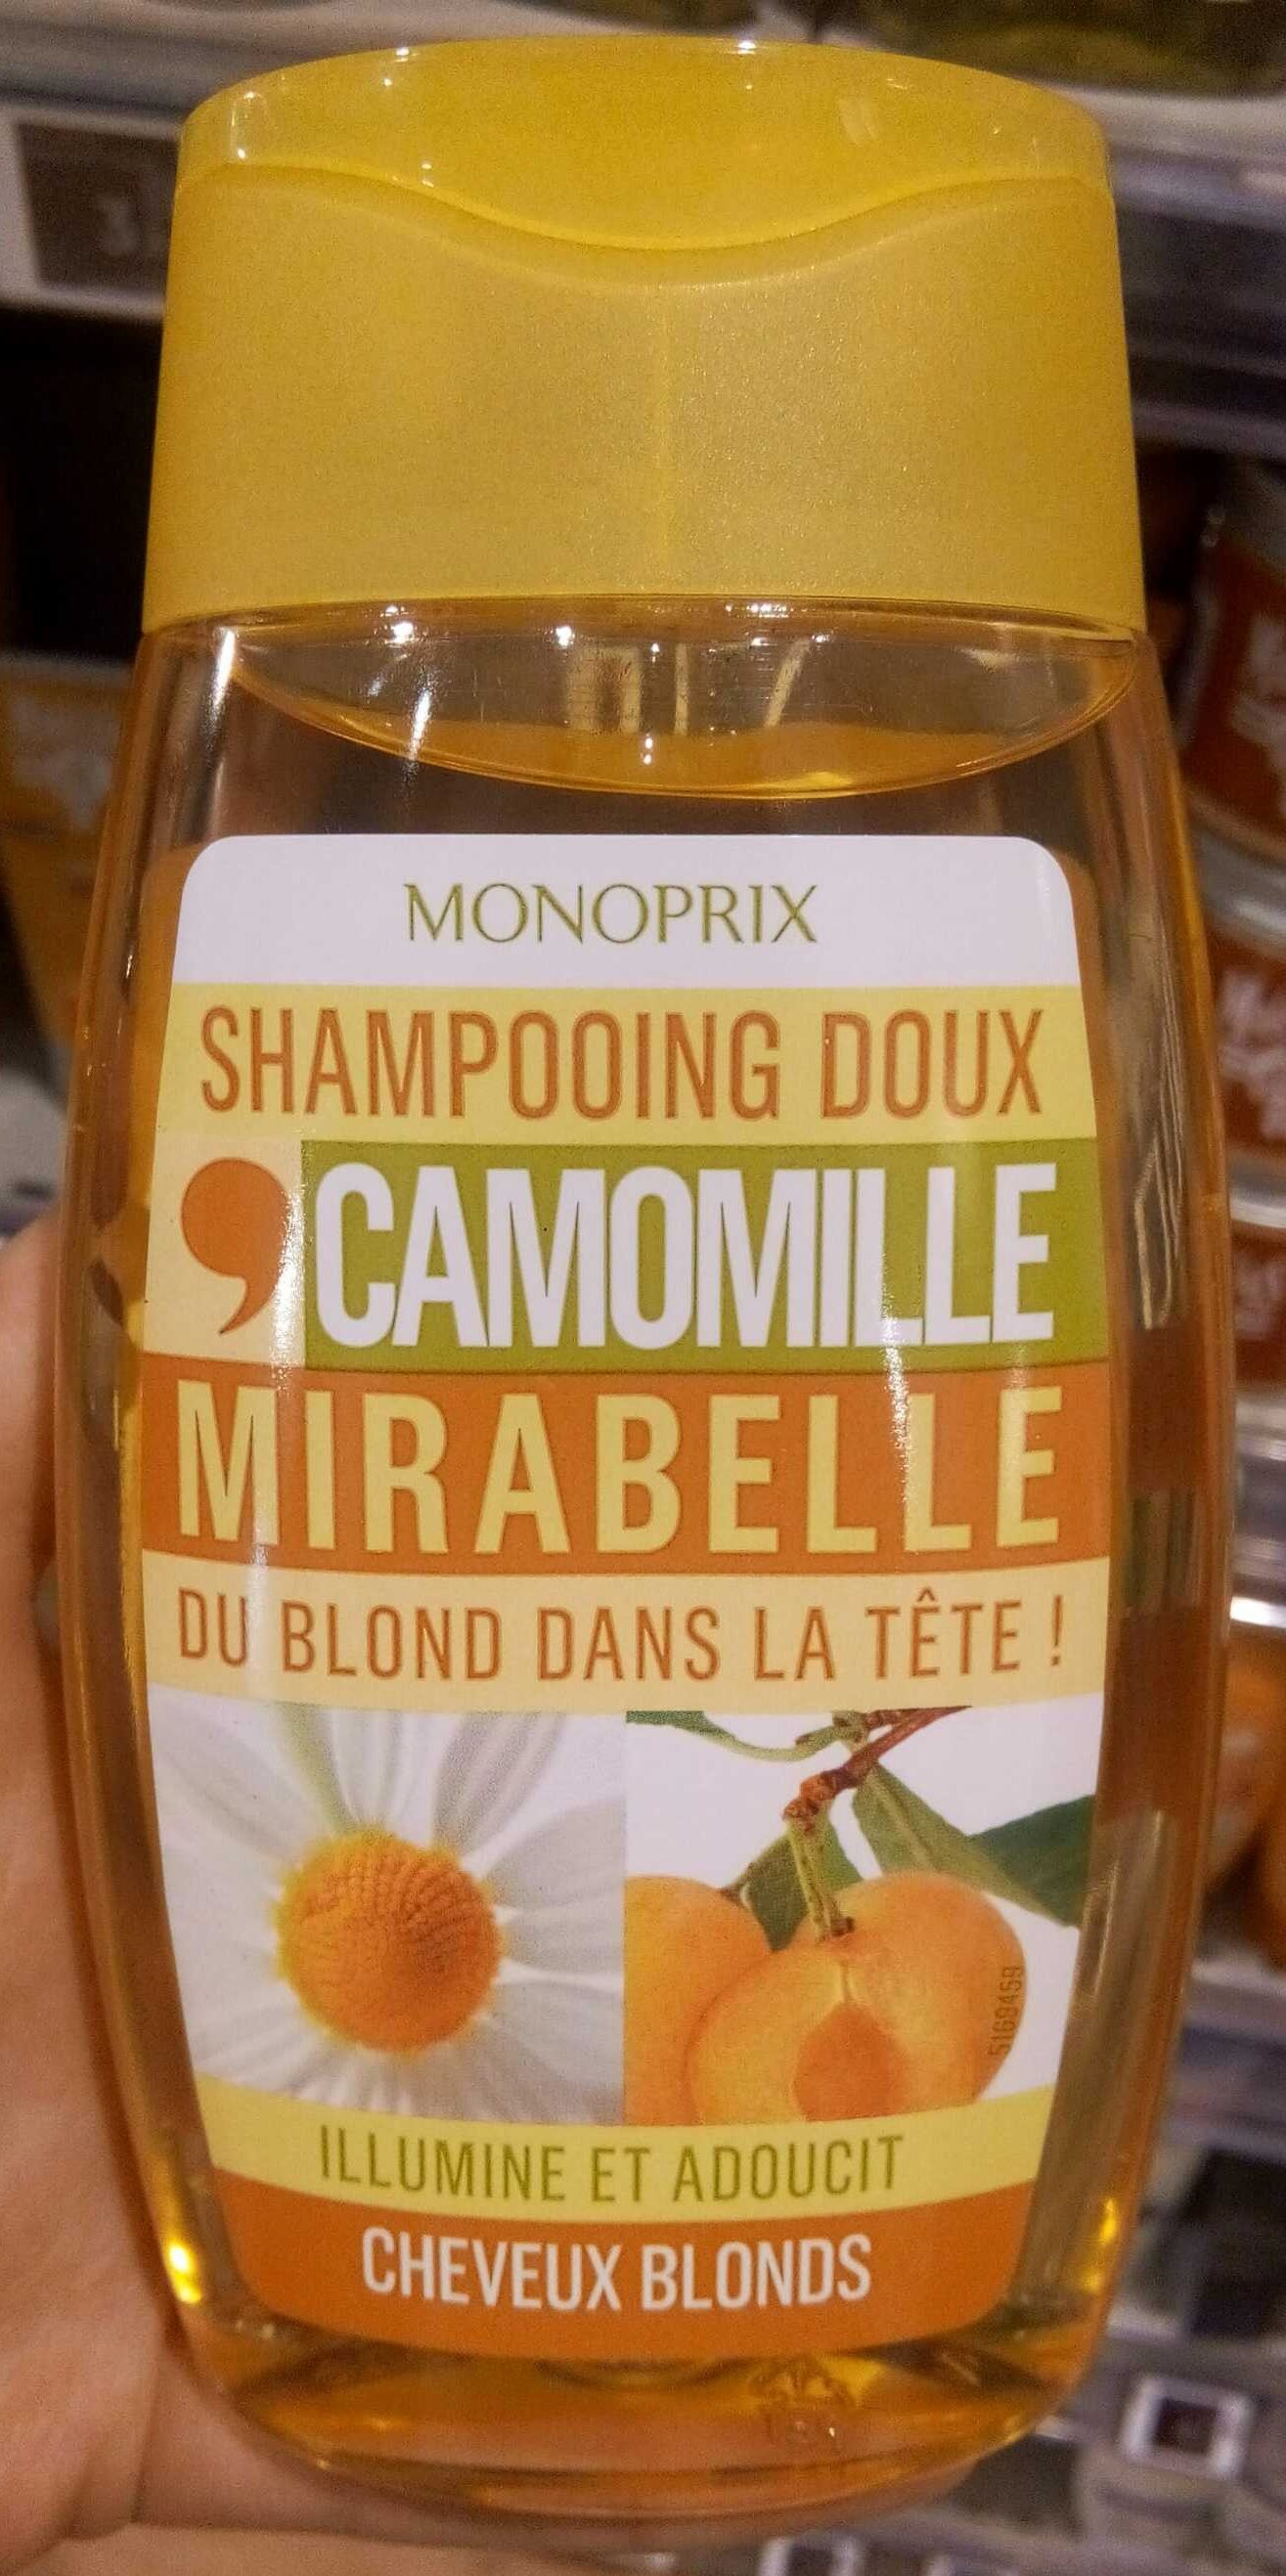 Shampooing doux camomille mirabelle - Product - fr